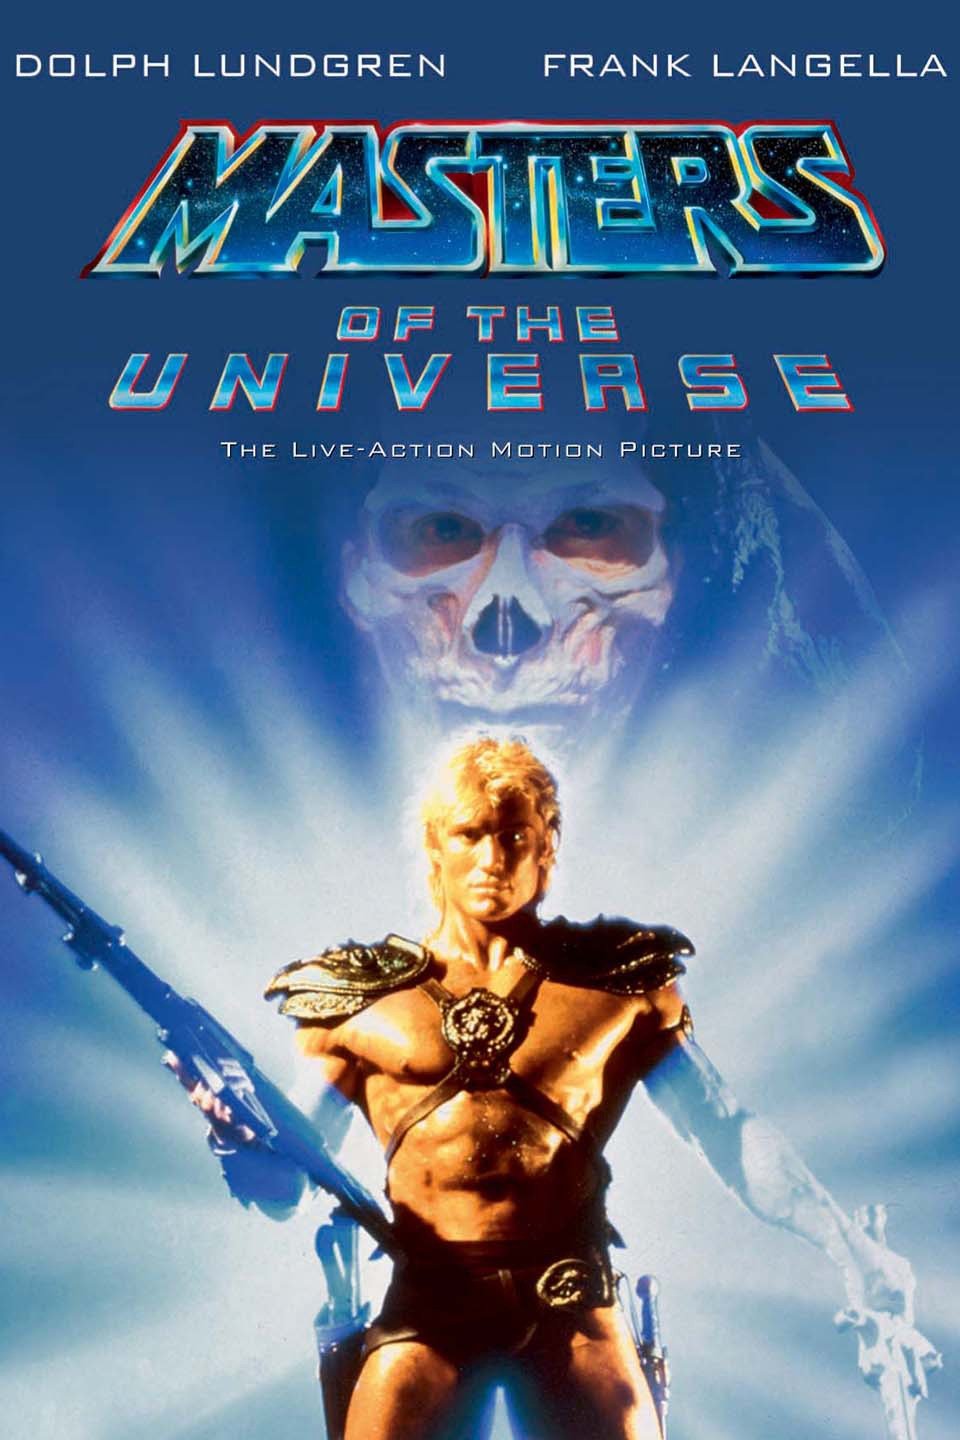 dolph lundgren masters of the universe